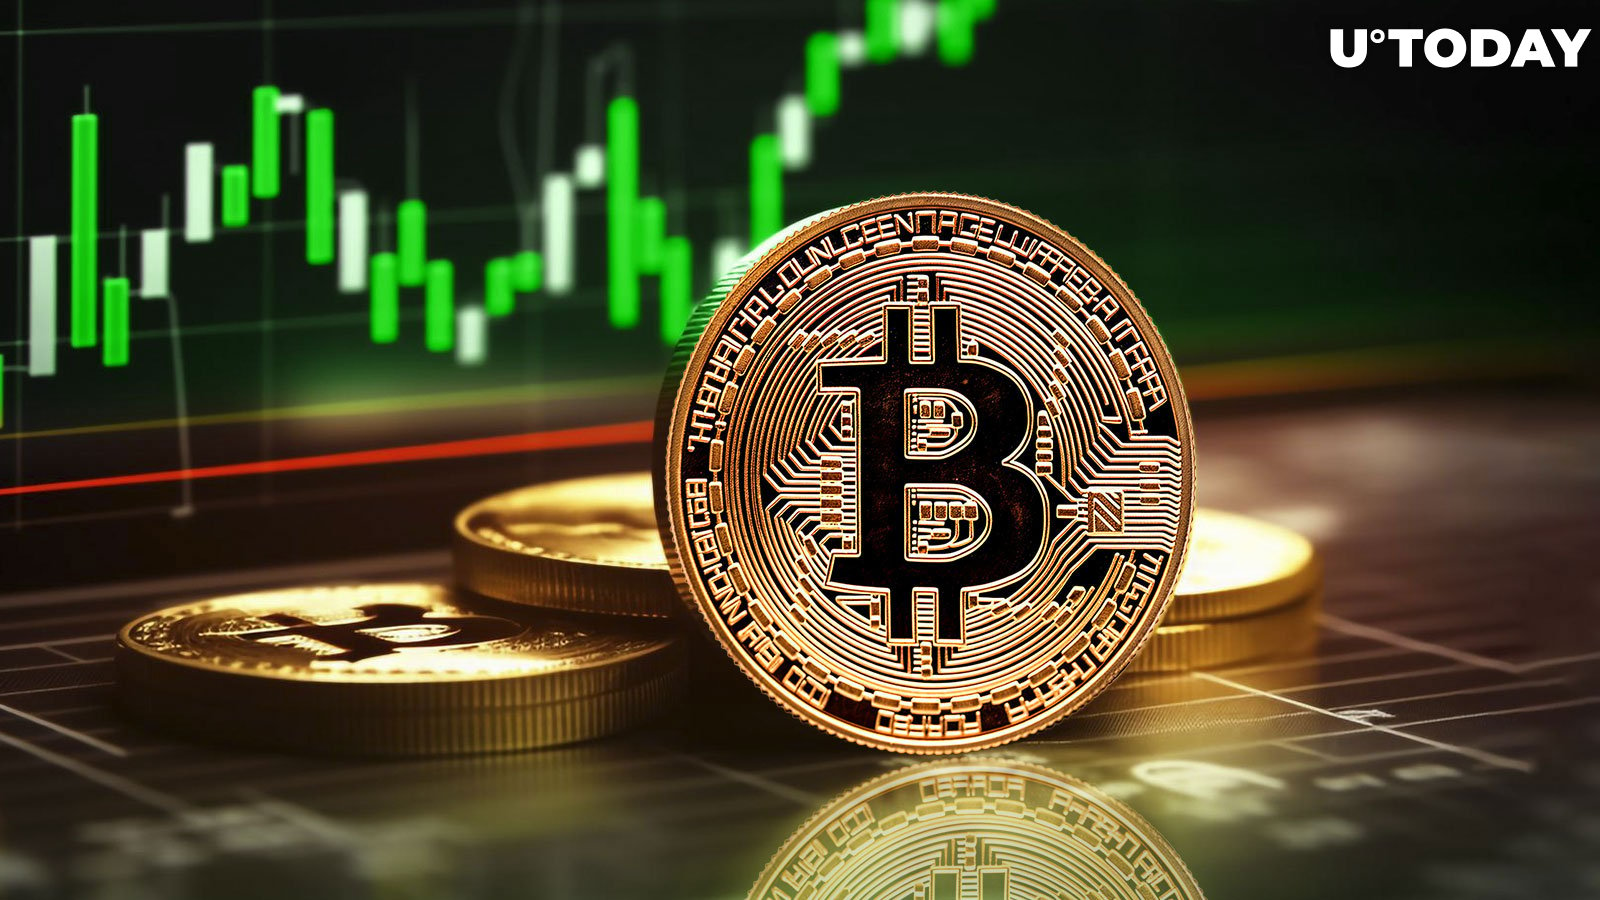 Bitcoin (BTC) Surge Puts 90% of Holders in Profit Territory After Two Years